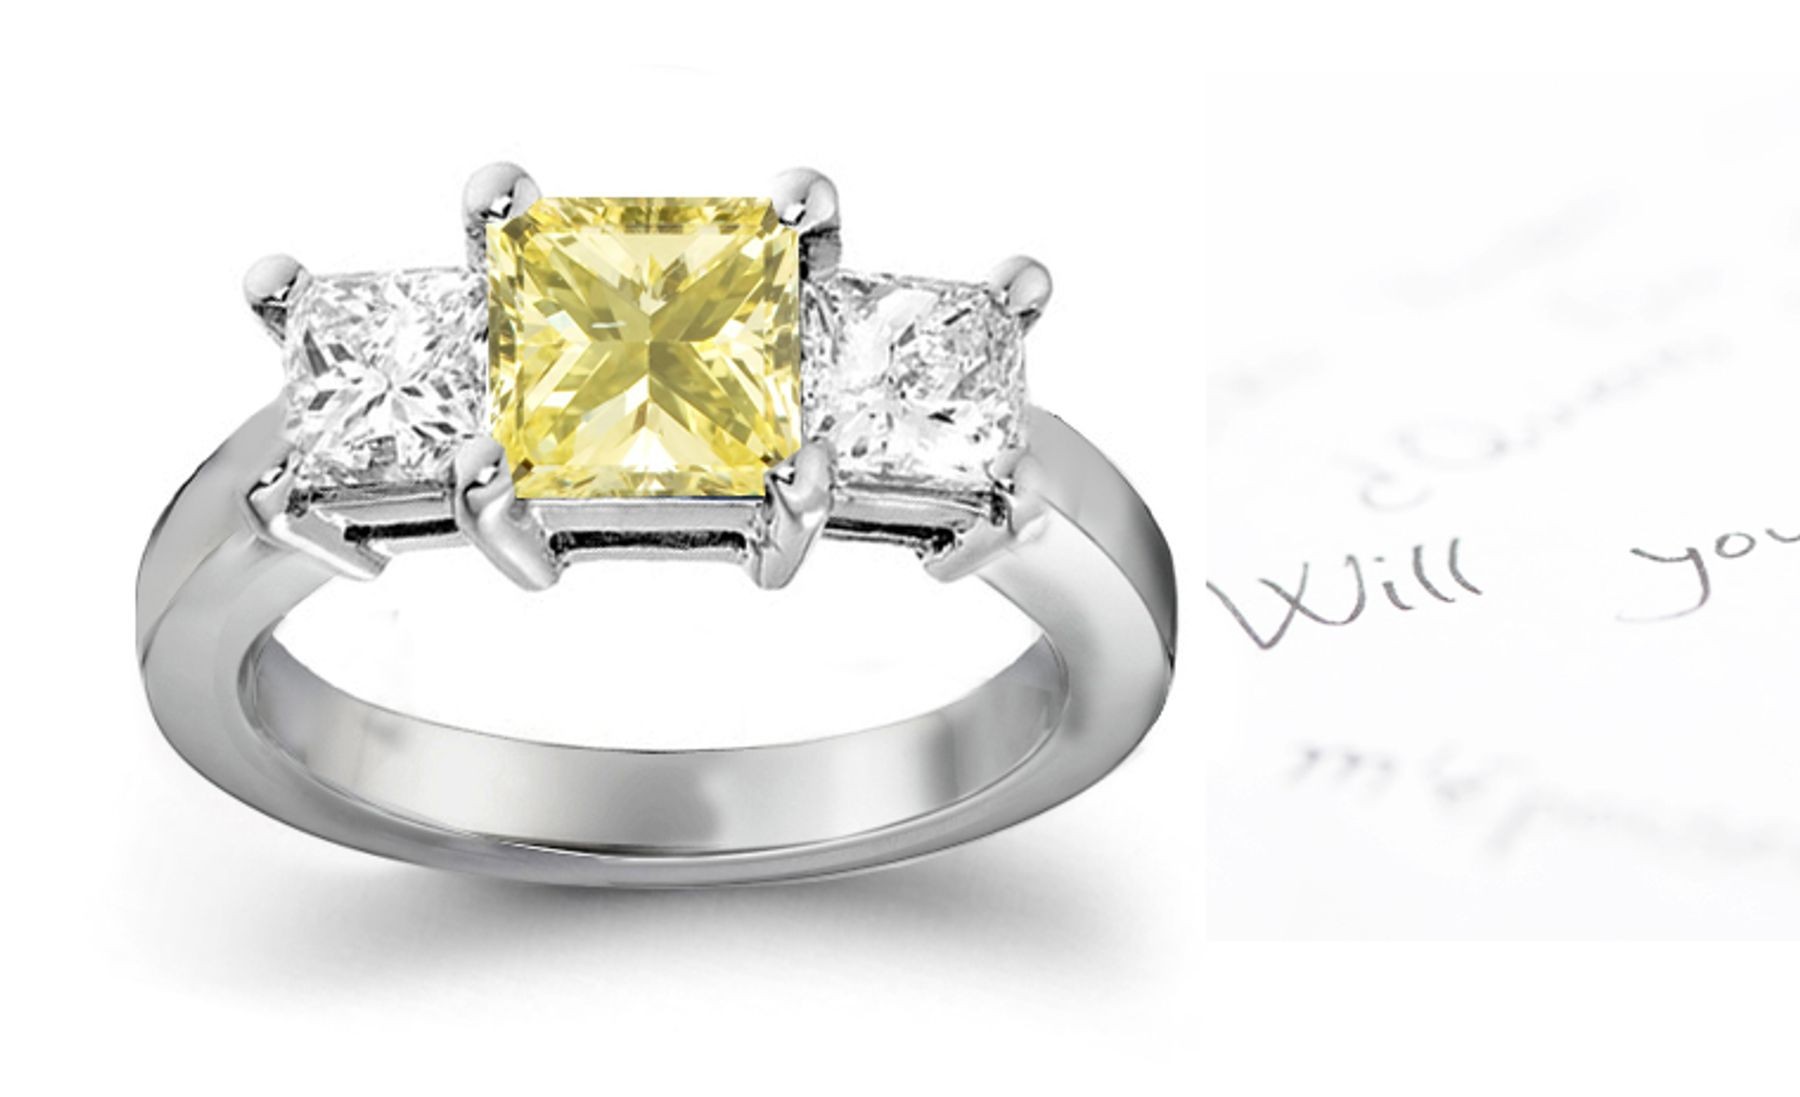 Premier Colored Diamonds Designer Collection - Yellow Colored Diamonds & White Diamonds Fancy Diamond Three Stone Engagement Rings